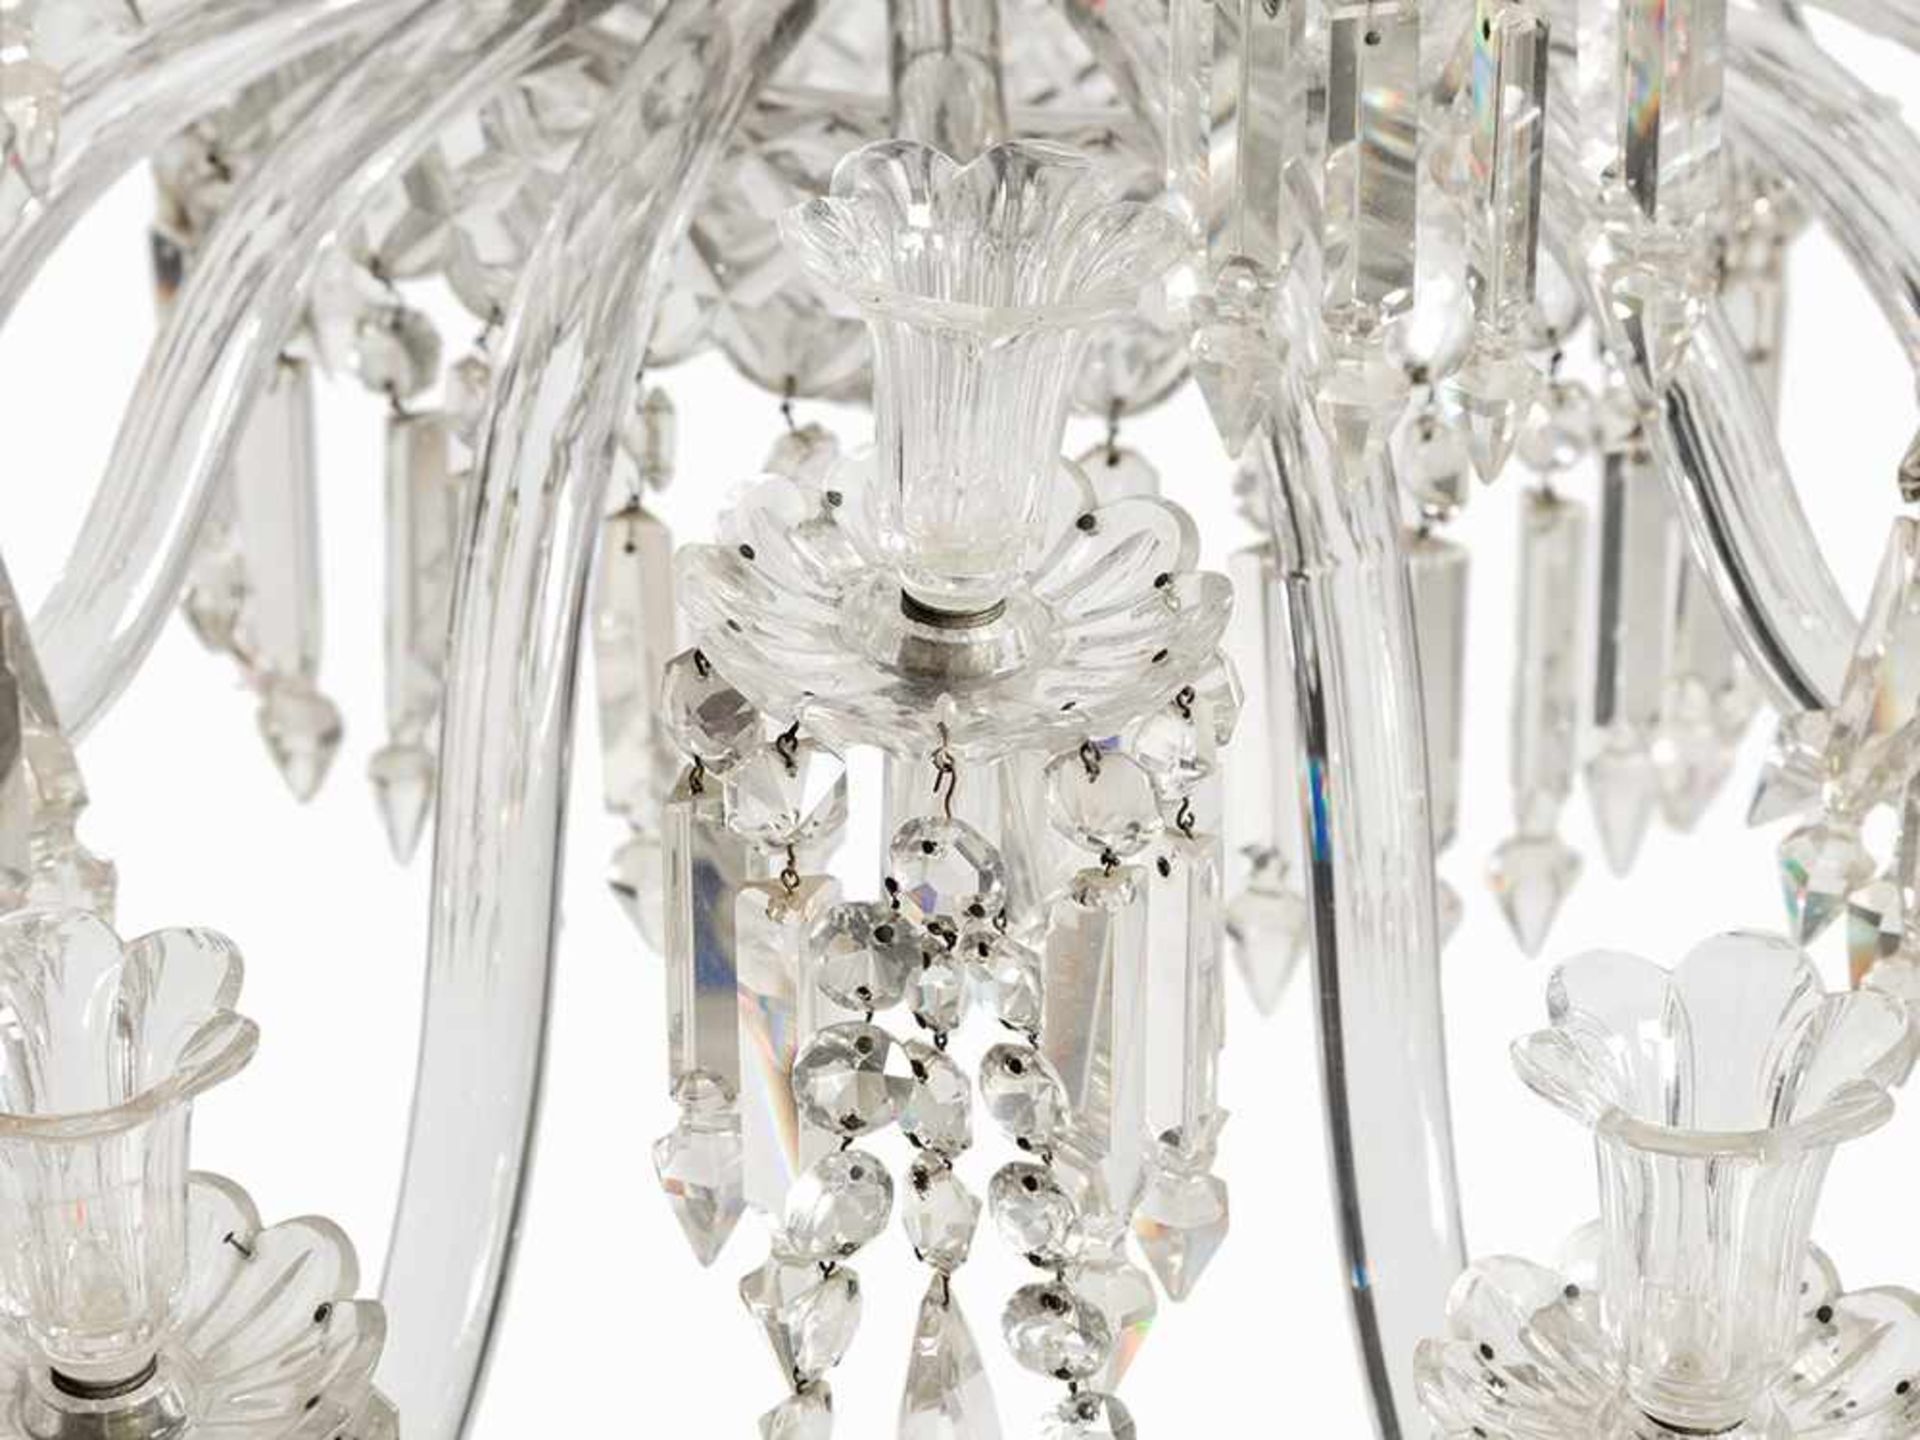 Magnificent Baccarat Chandelier, France, 19th C. Baccarat crystal France, 19th century 30 electric - Image 5 of 10